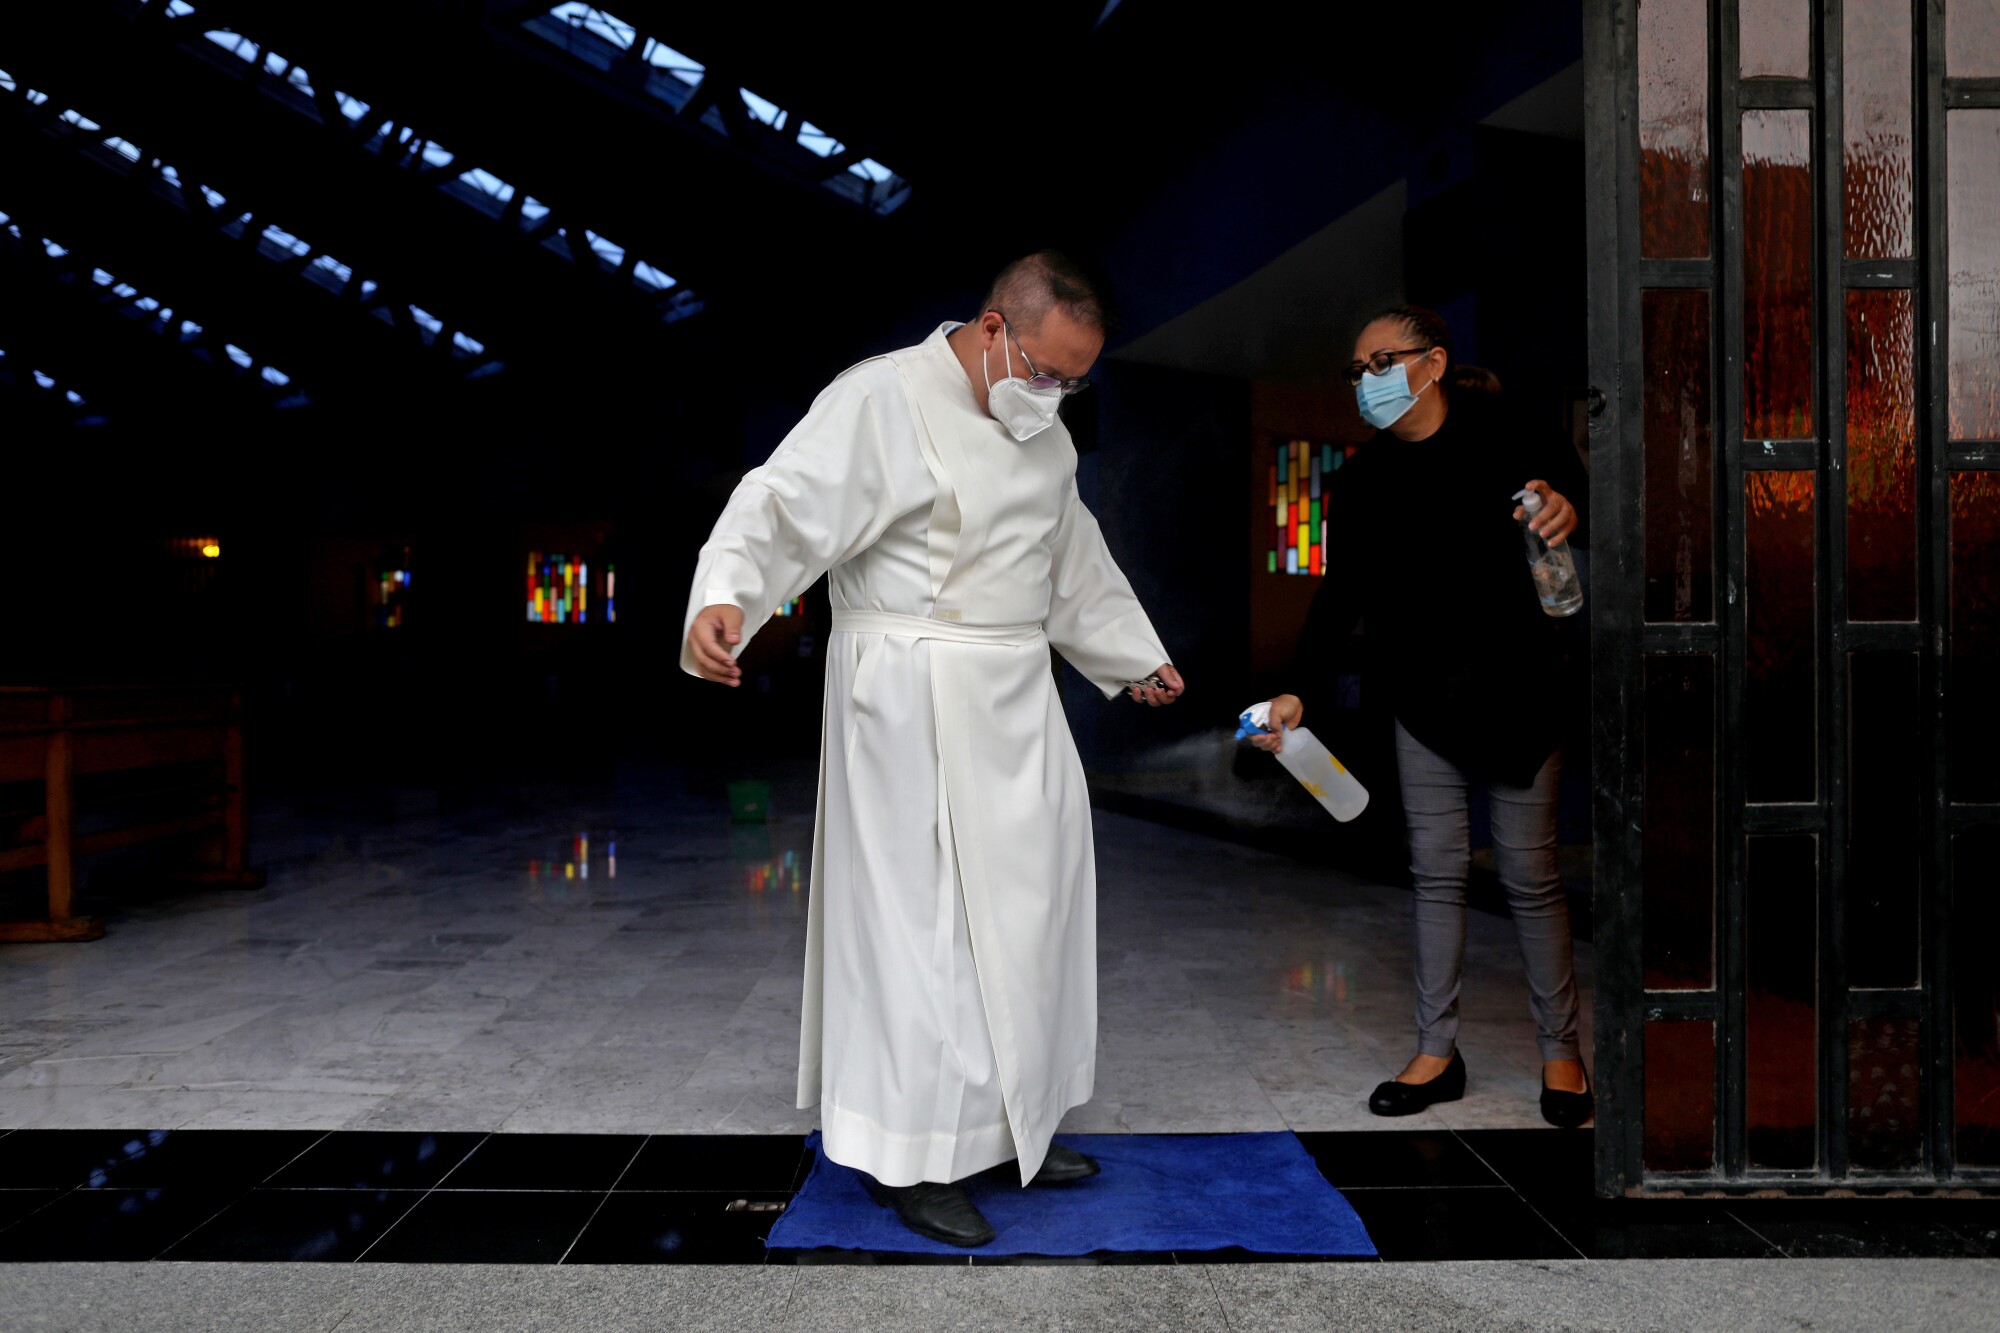 A woman sprays disinfectant on a priest in white robes